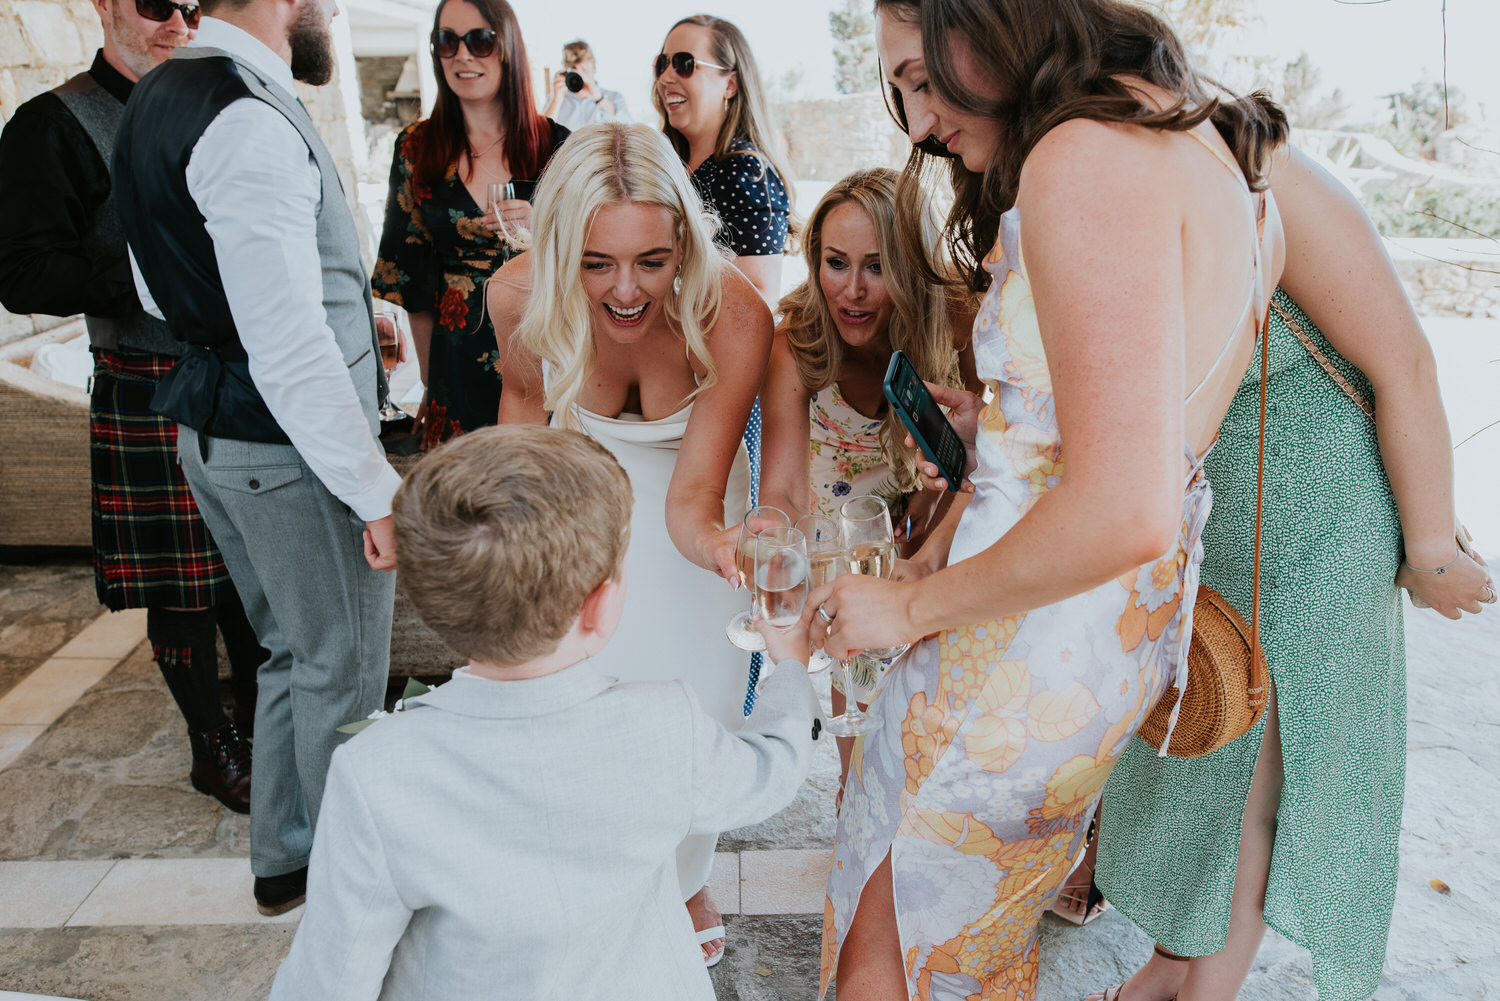 Mykonos wedding photographer: bride and friends smiling clinking glasses with the little boy.